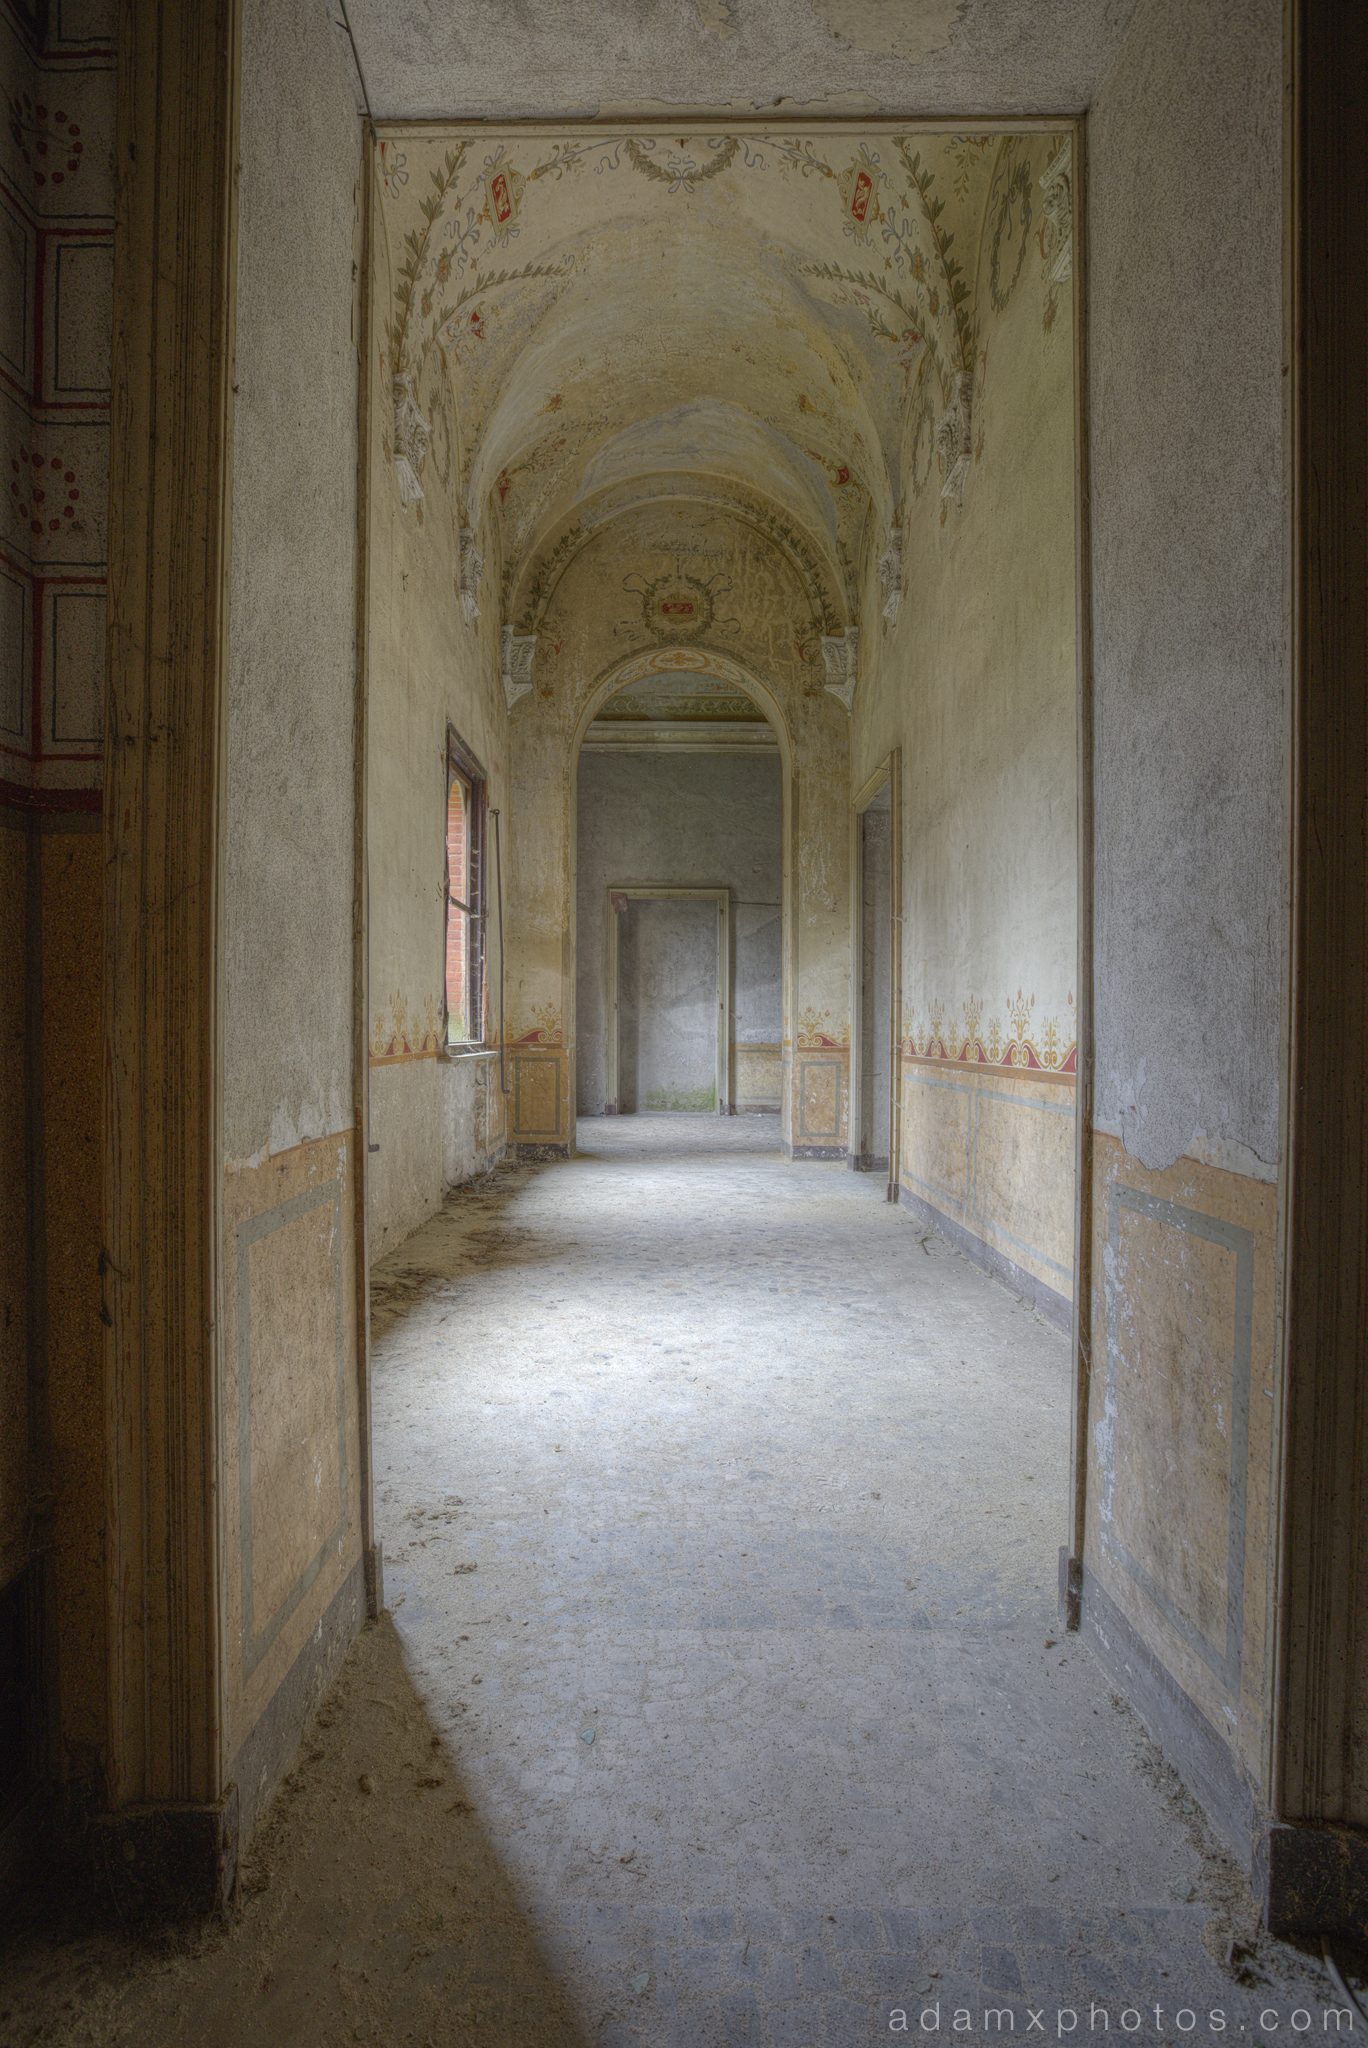 Castello di R Italy castle Urbex Adam X Urban Exploration ornate painted hallway corridor walls murals fresco frescoes detail flowers photo photos report decay detail UE abandoned derelict unused empty disused decay decayed decaying grimy grime